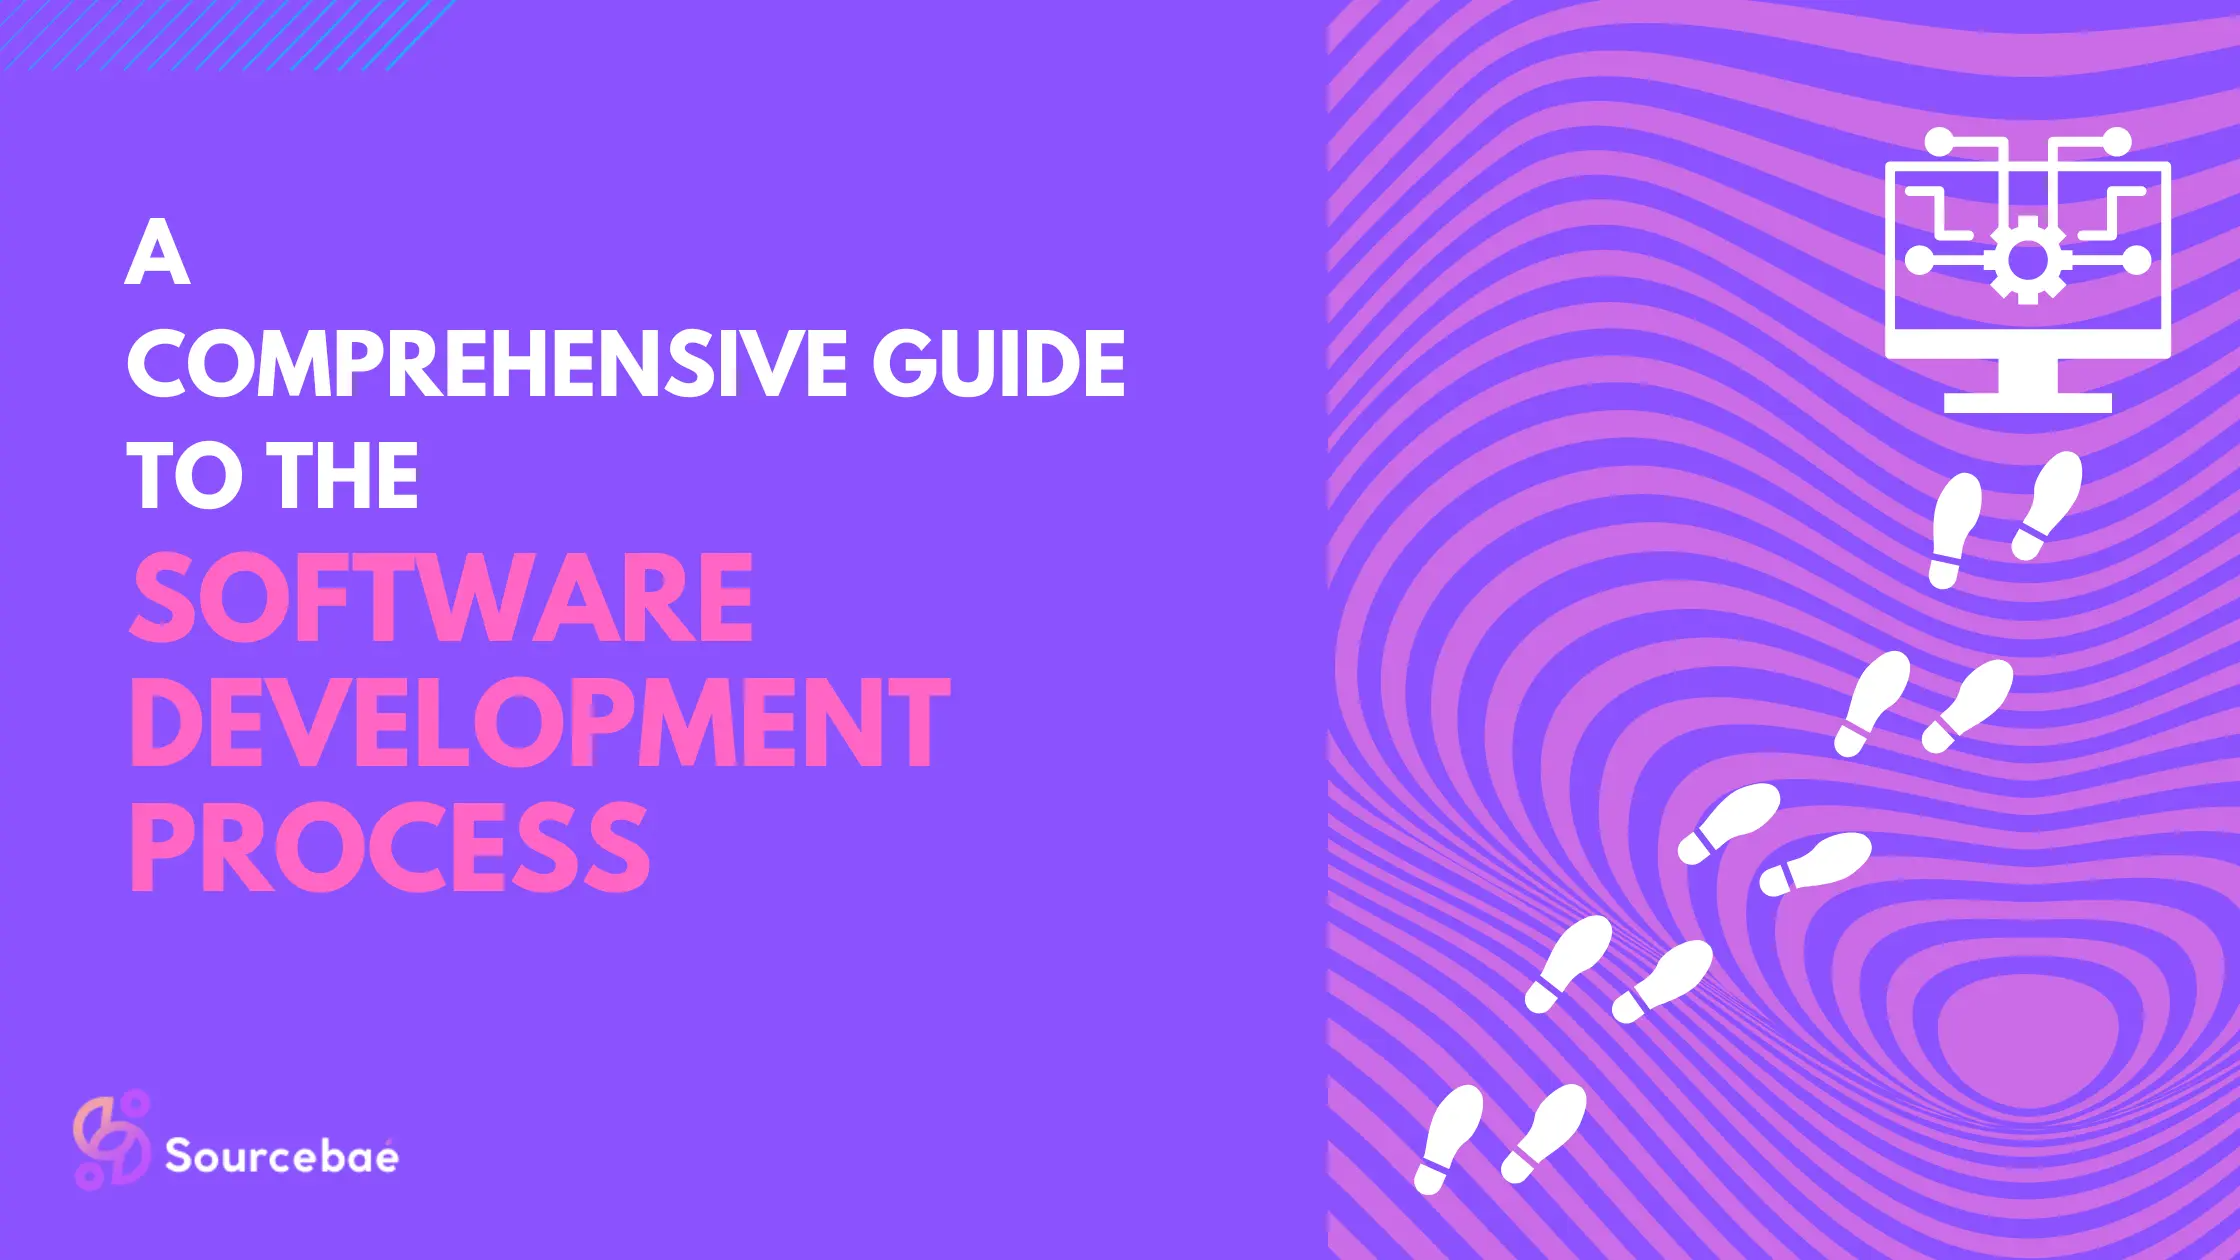 A Comprehensive Guide to the Software Development Process